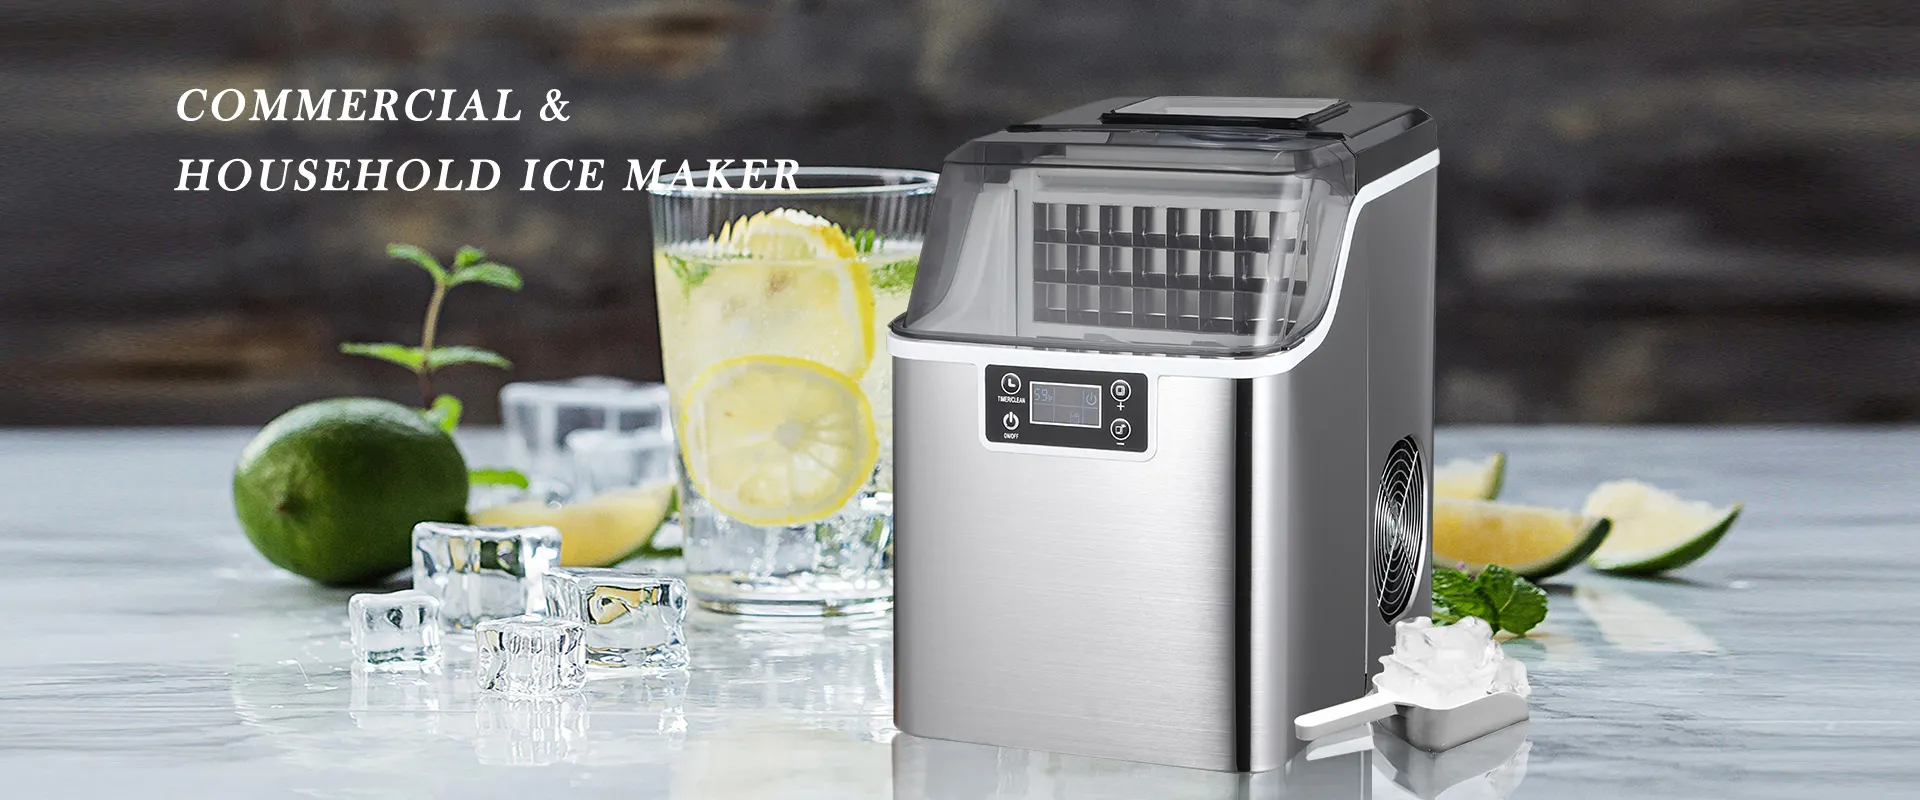 Cheap Household Ice Maker China